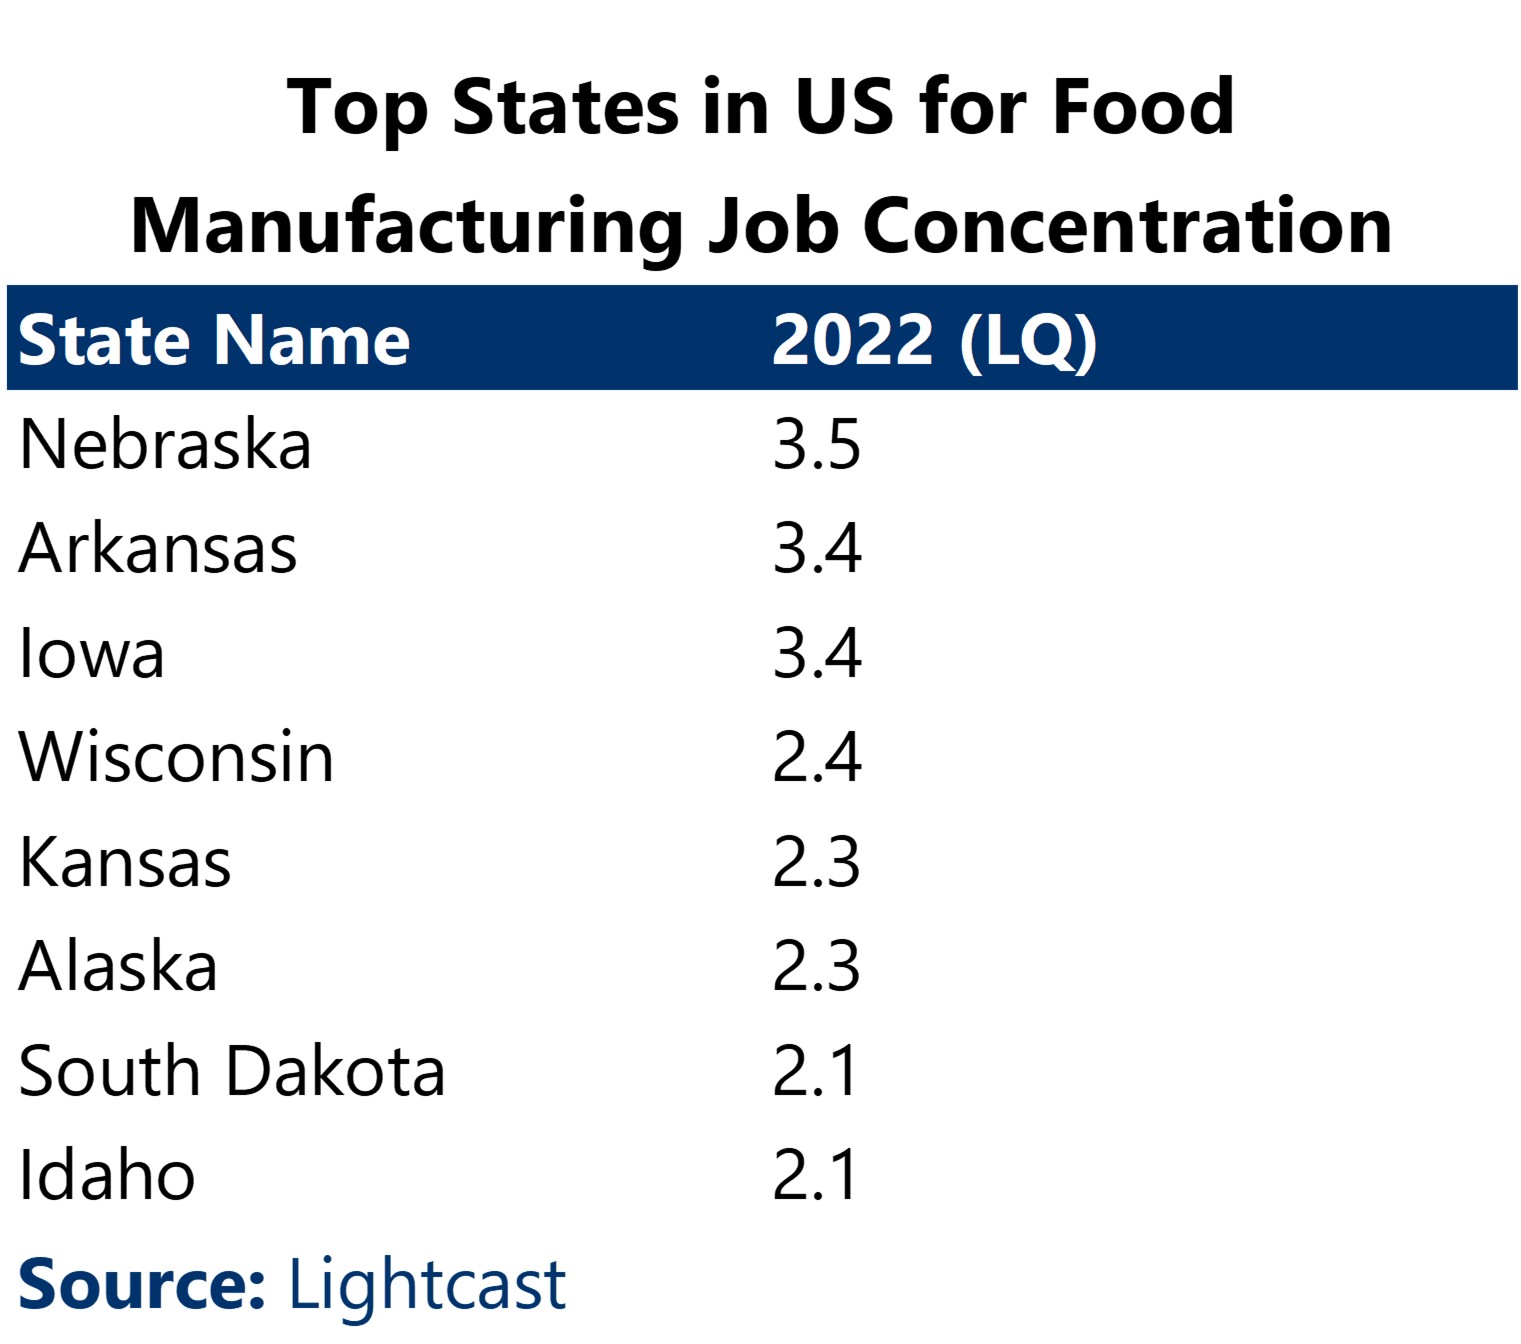 Top States in US for Food Manufacturing Job Concentration